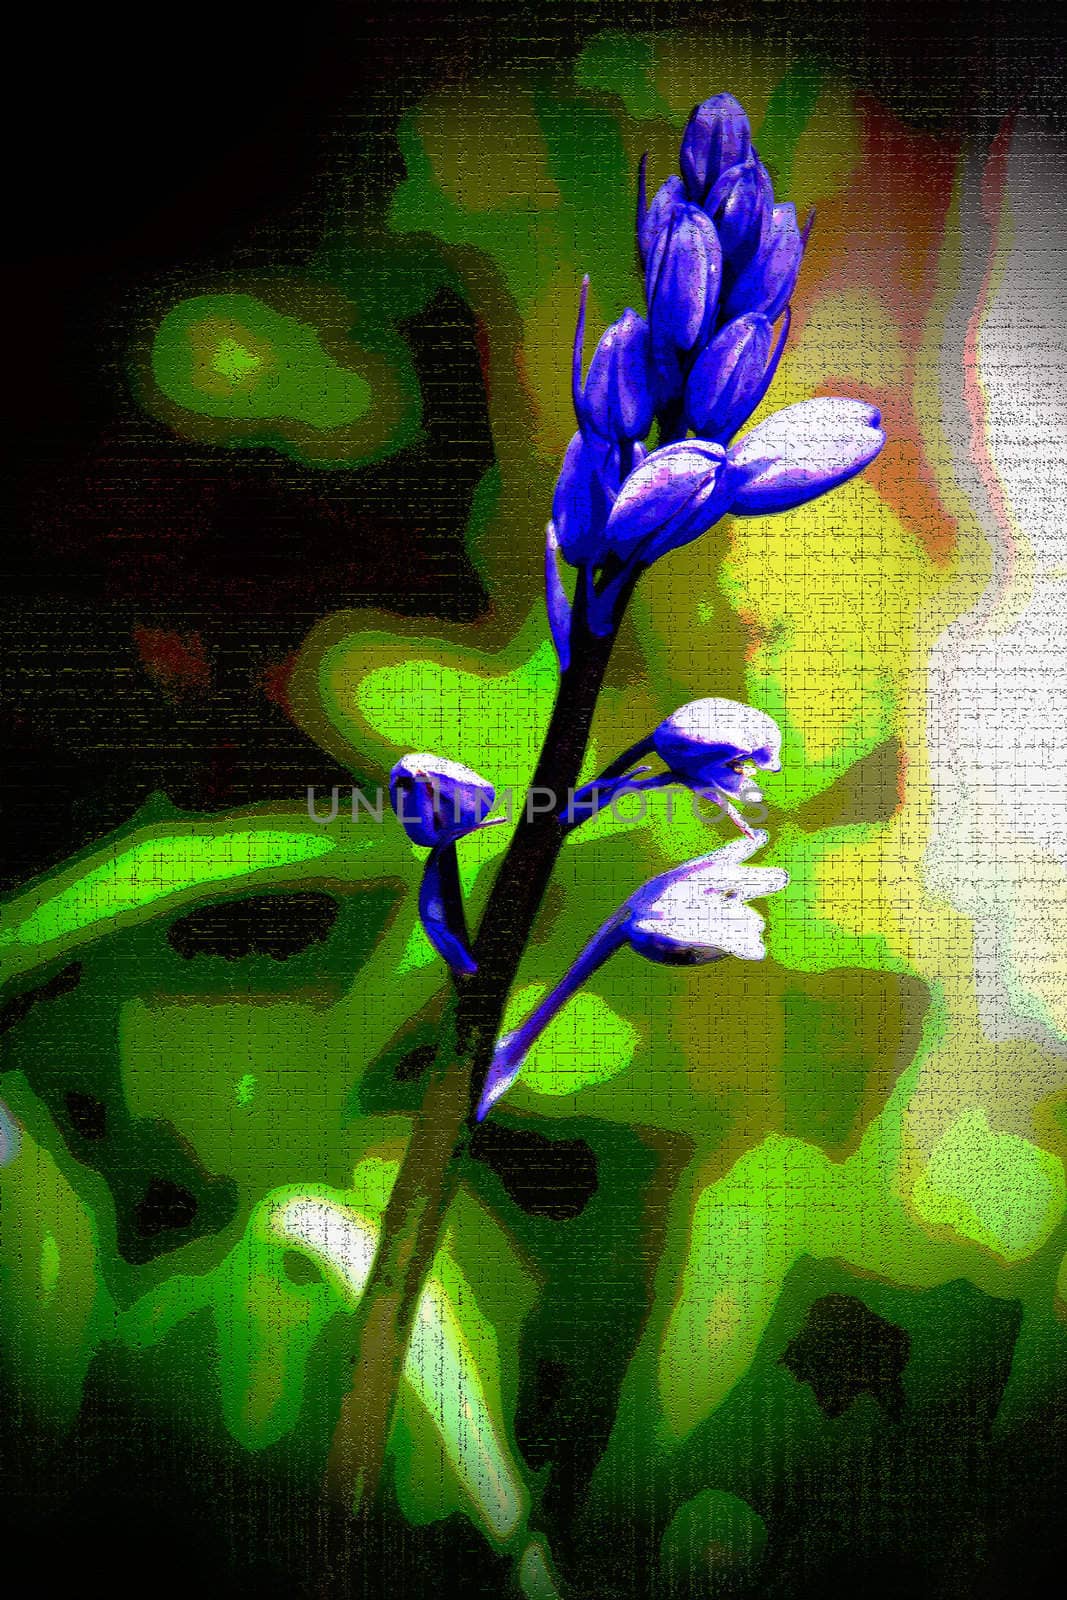 A bluebell fine art image using filters and blending modes for effect